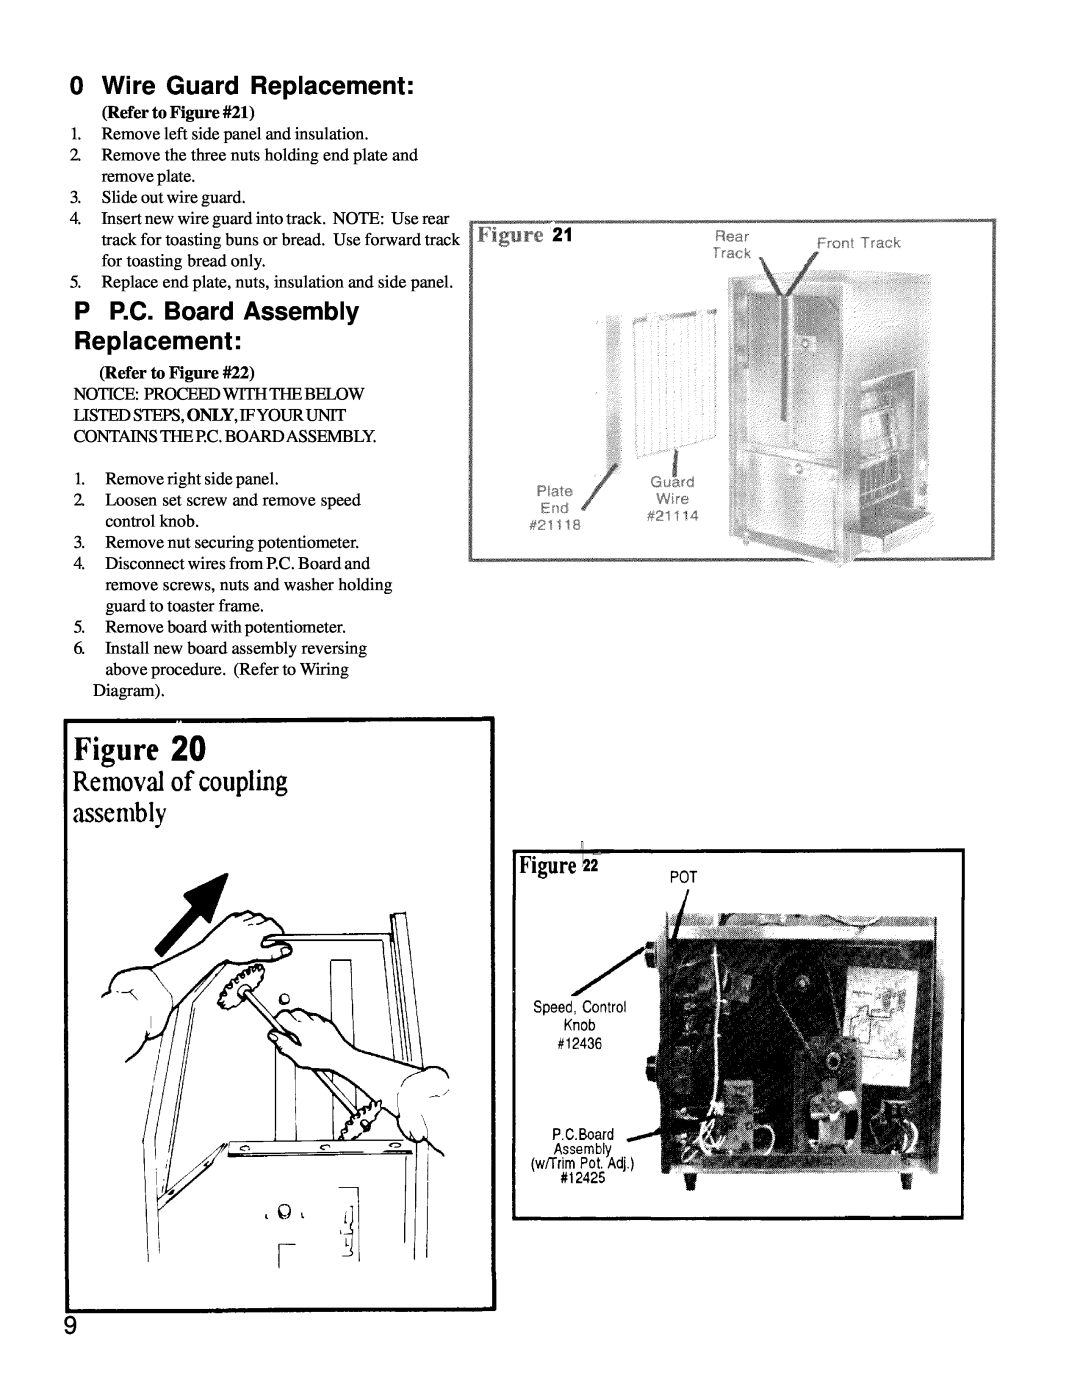 Merco Savory C-40 manual Wire Guard Replacement, Refer to Figure #21, Refer to Figure #22, PP.C. Board Assembly Replacement 